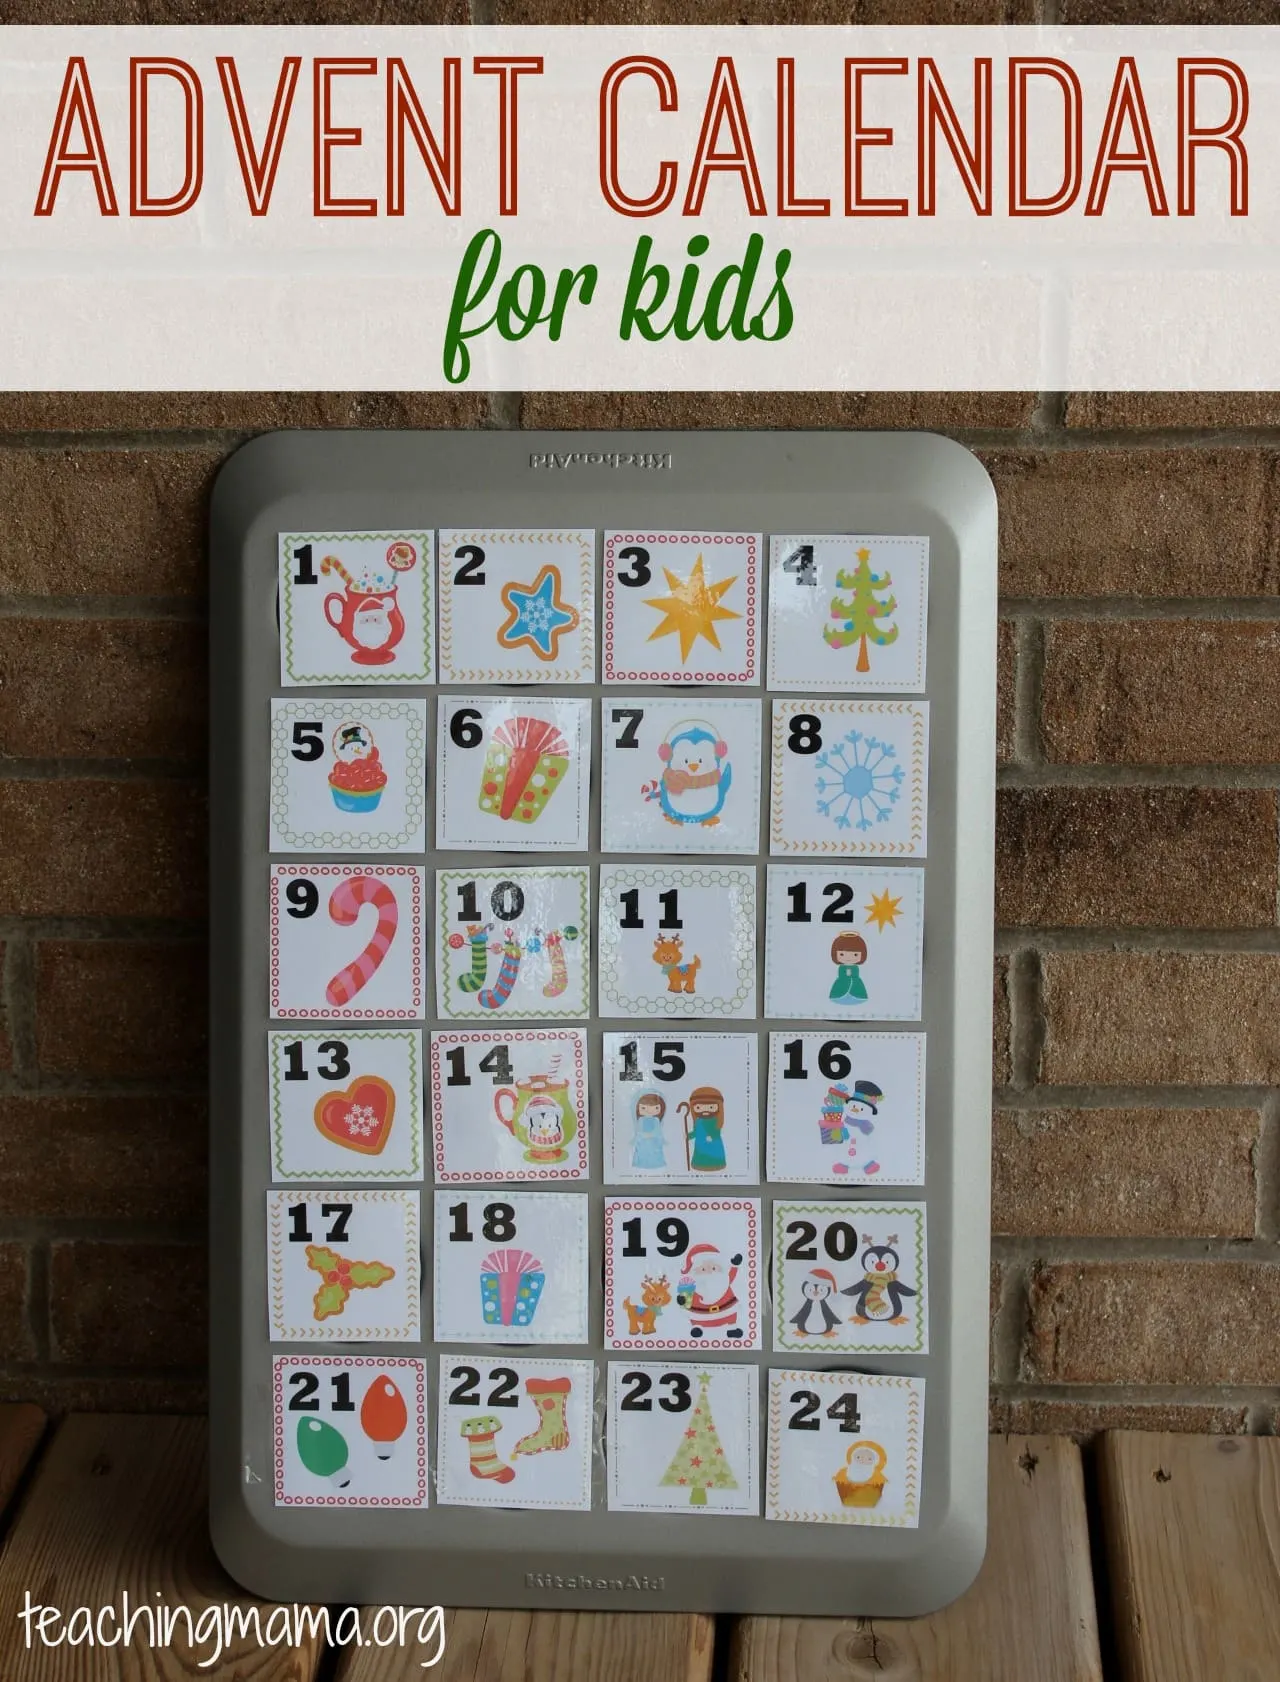 This muffin tin advent calendar is the perfect DIY kid-friendly Christmas countdown. Put little treats or candy in the muffin cups for the kids each day. #AdventCalendar #ChristmasCountdown #FreePrintable